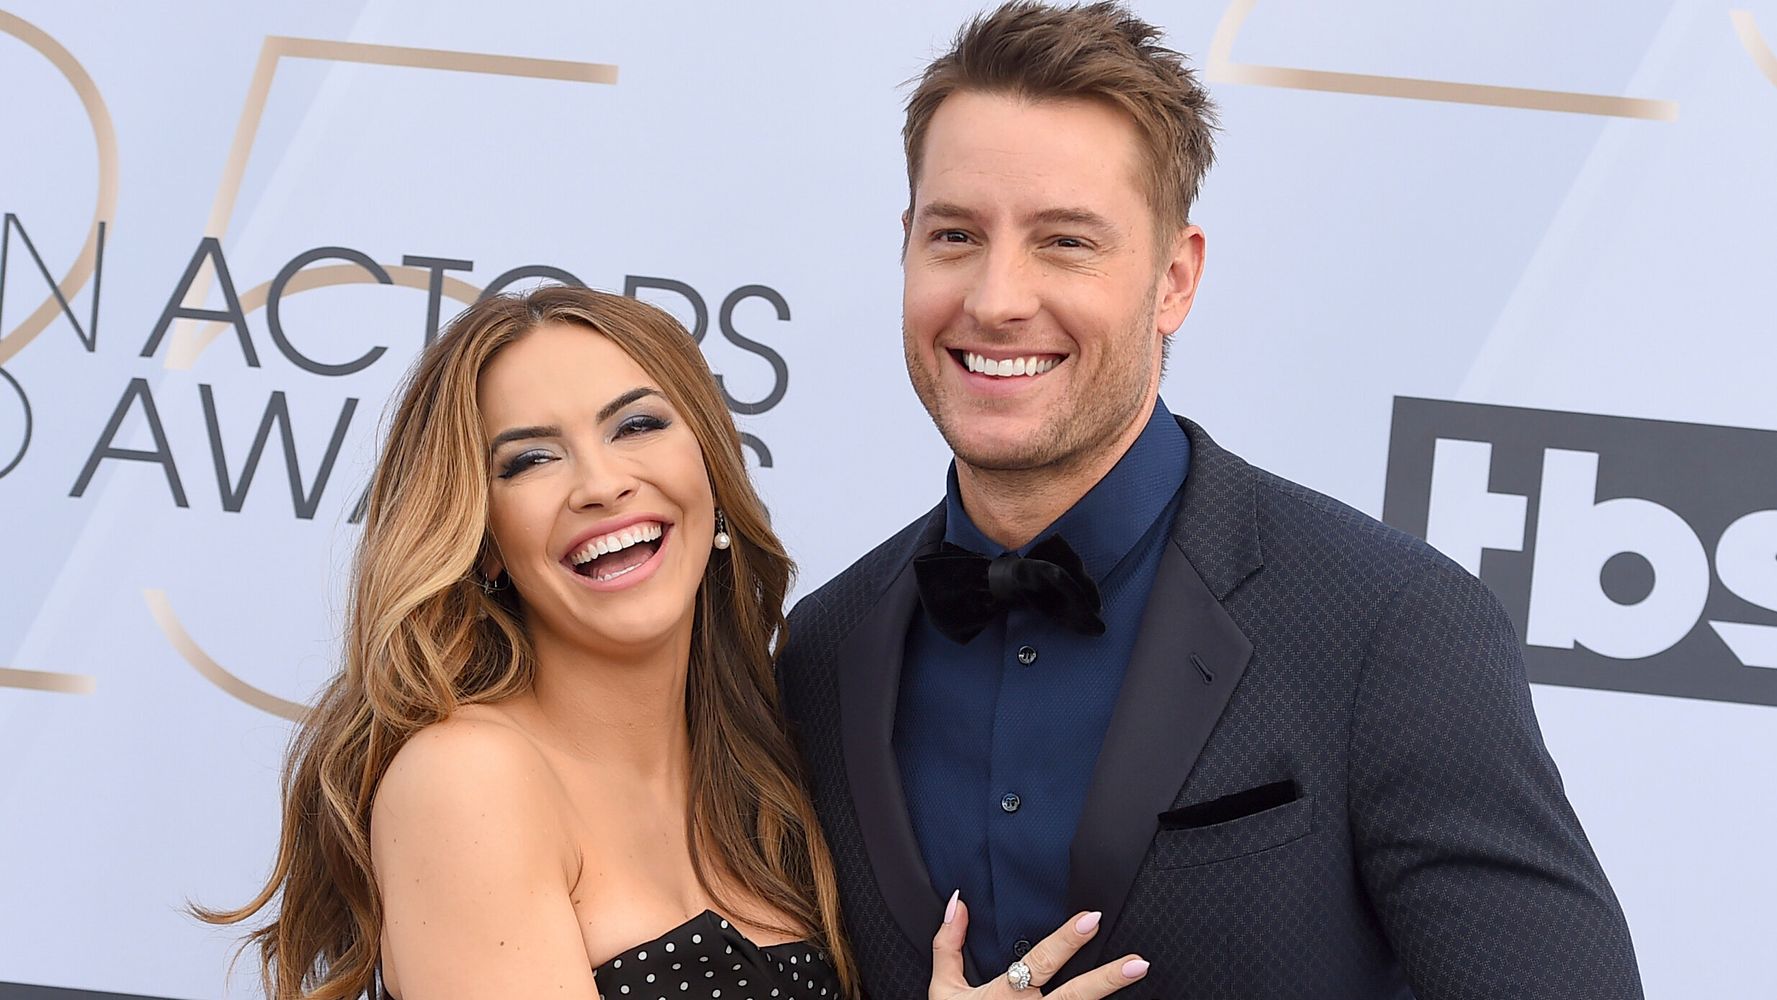 Why Did Justin Hartley and Chrishell Stause of "This Is Us" and "Selling Sunset" Divorce?